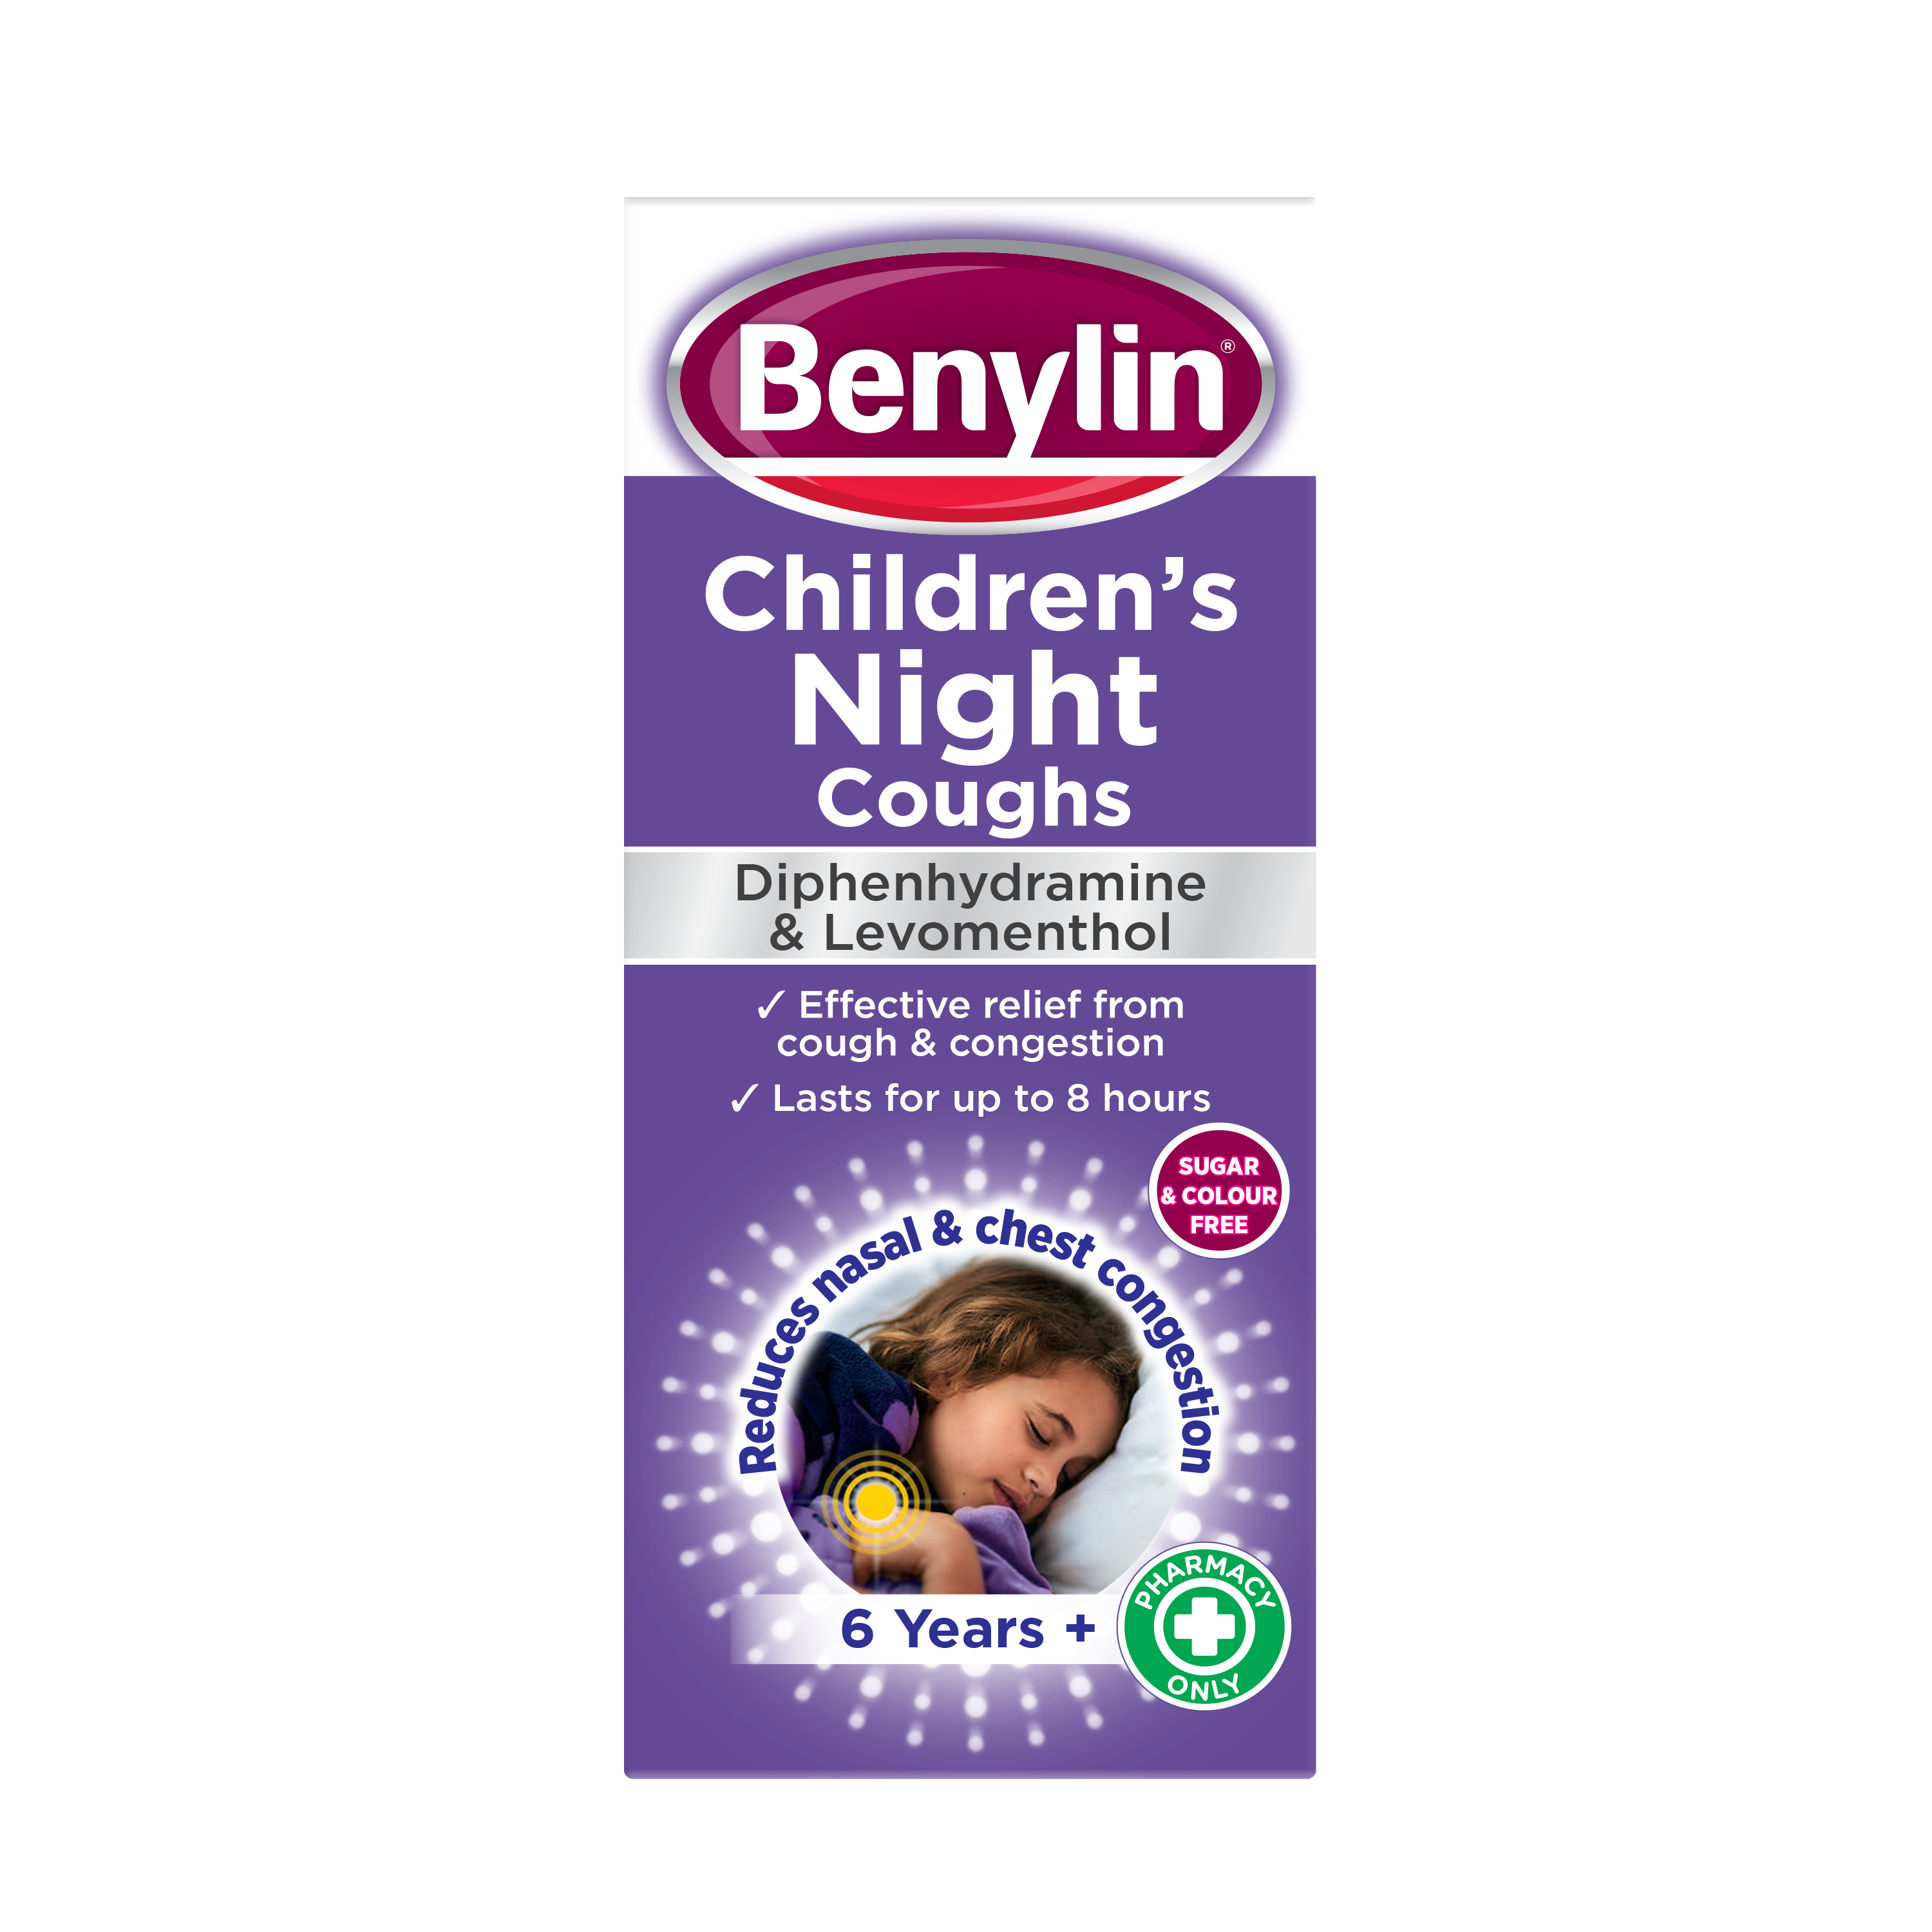 Benylin® Childrens Night Coughs Pack image